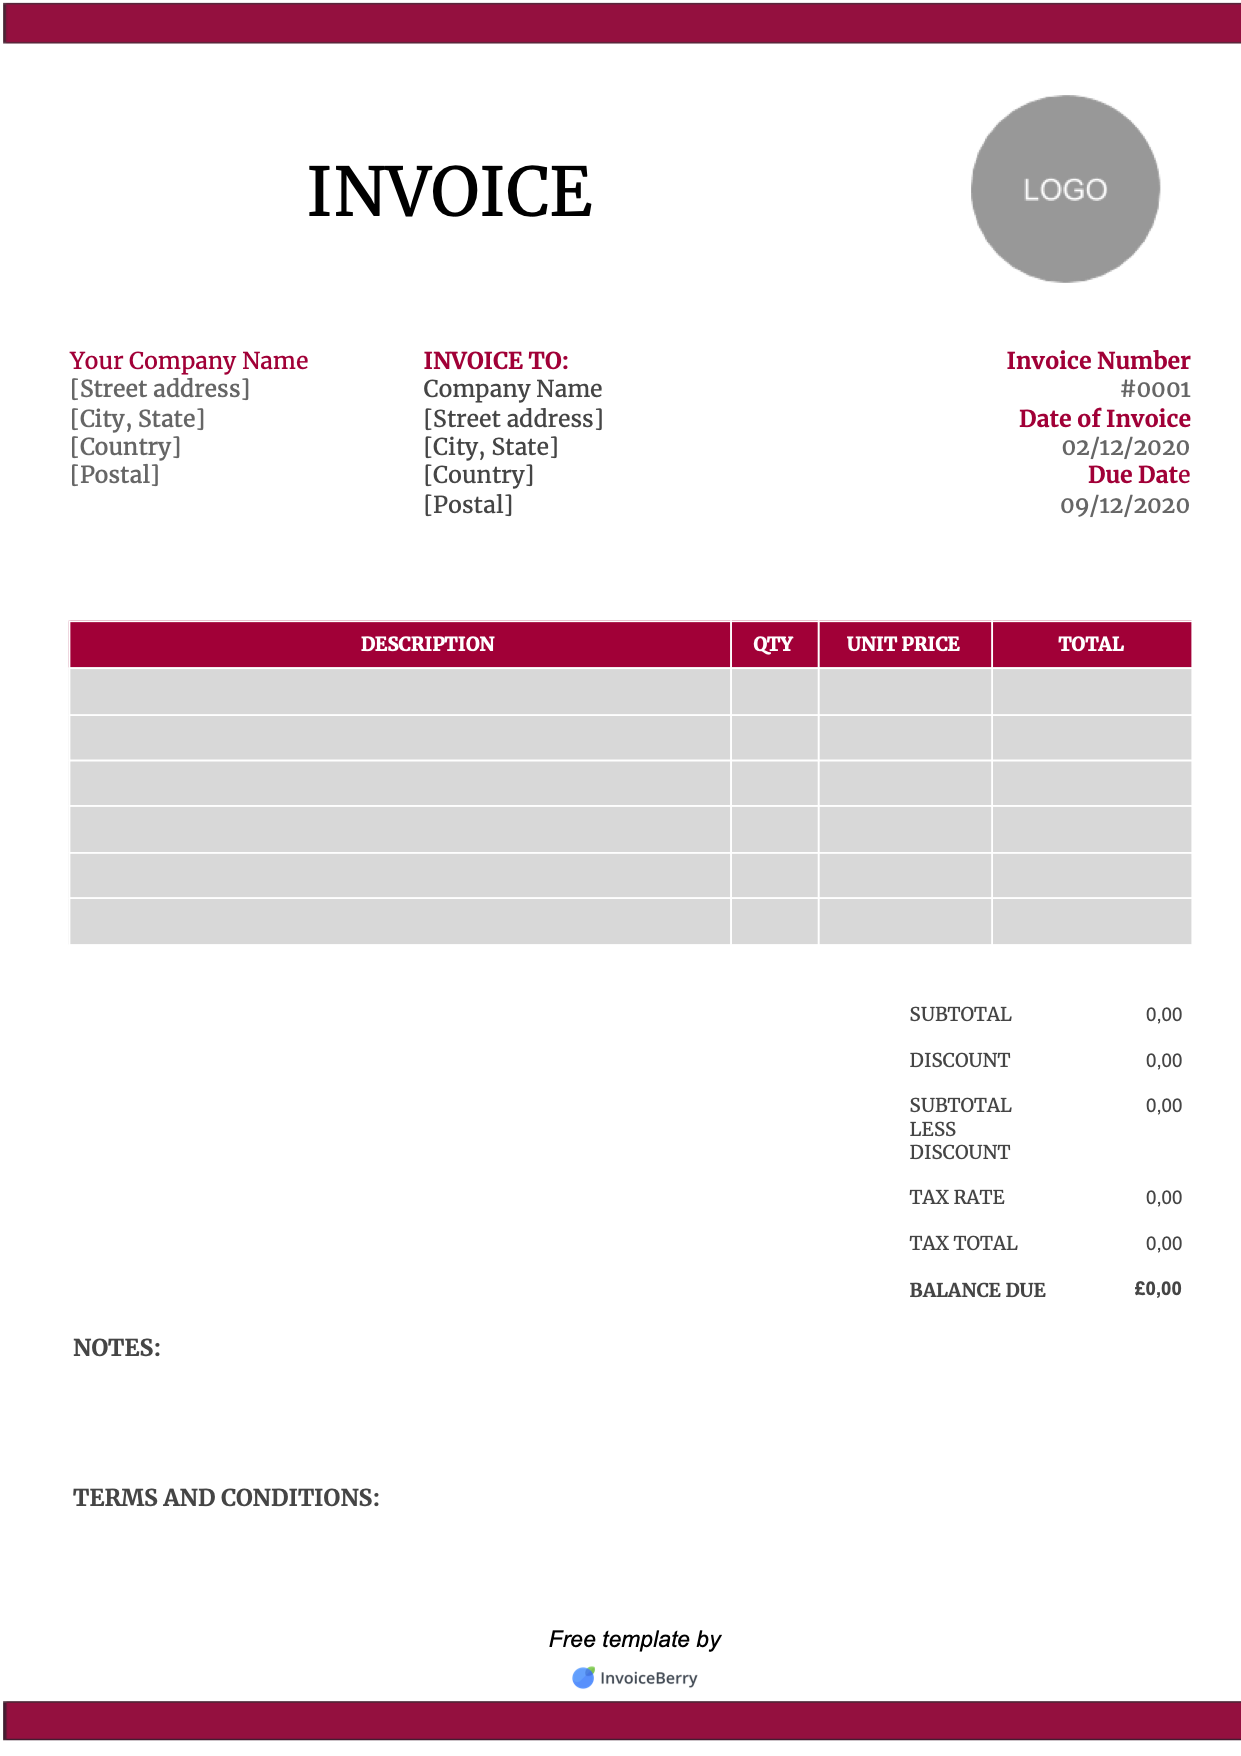 Free UK Invoice Template Sample #20 Download  InvoiceBerry Throughout Business Invoice Template Uk